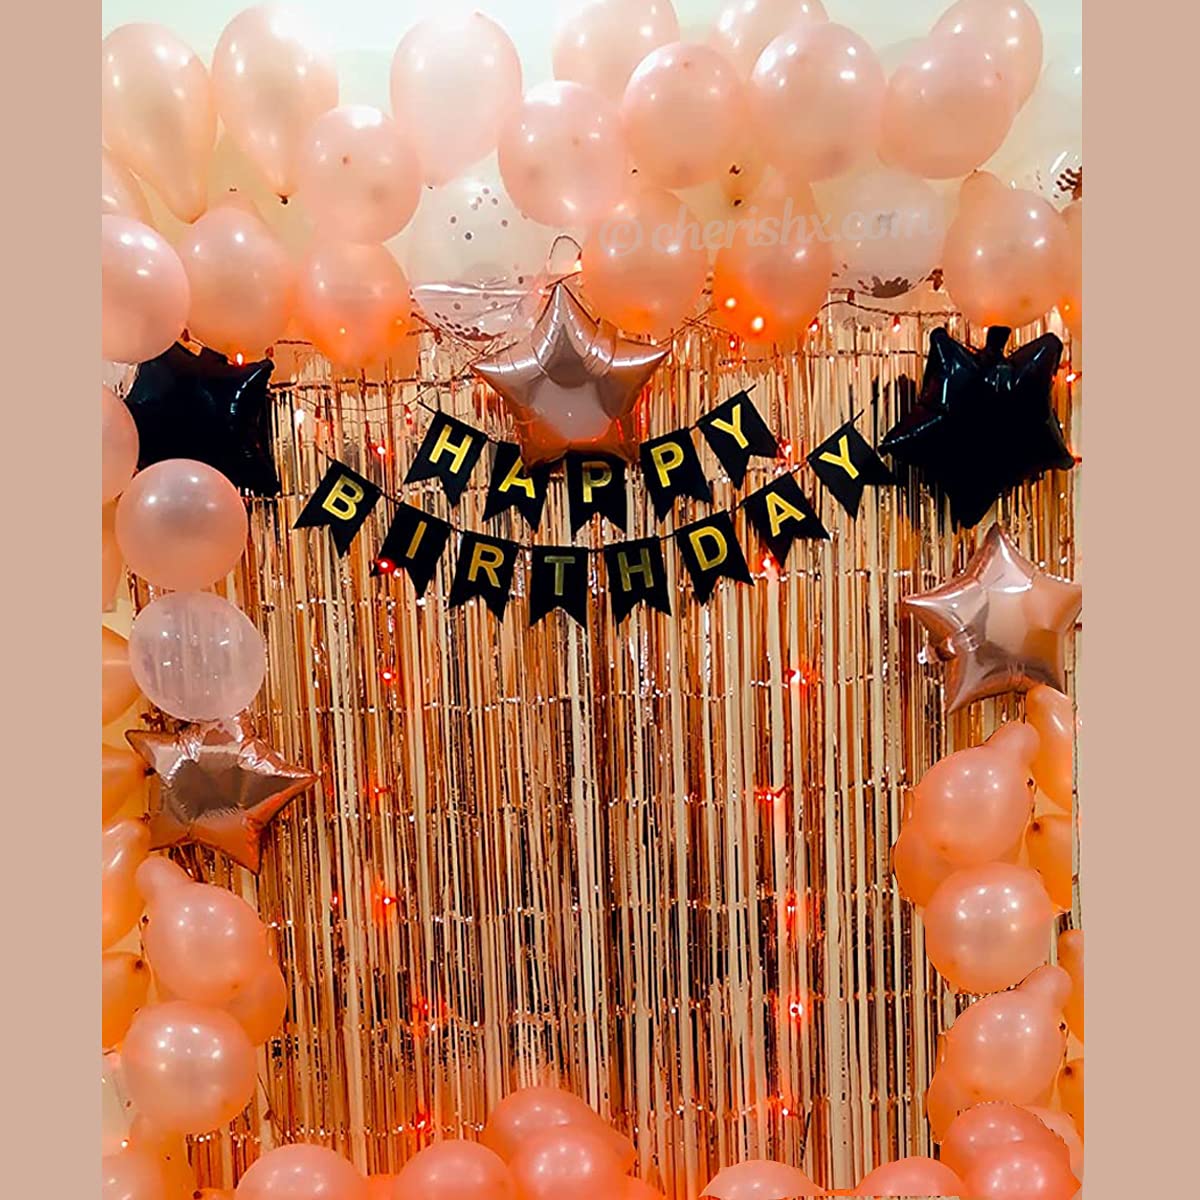 Rose Gold 50th Birthday Decorations Happy Birthday Foil Balloon Banner Rose  Gold Heart Star Balloon 50th Birthday Party Supplies - Buy Rose Gold 50th